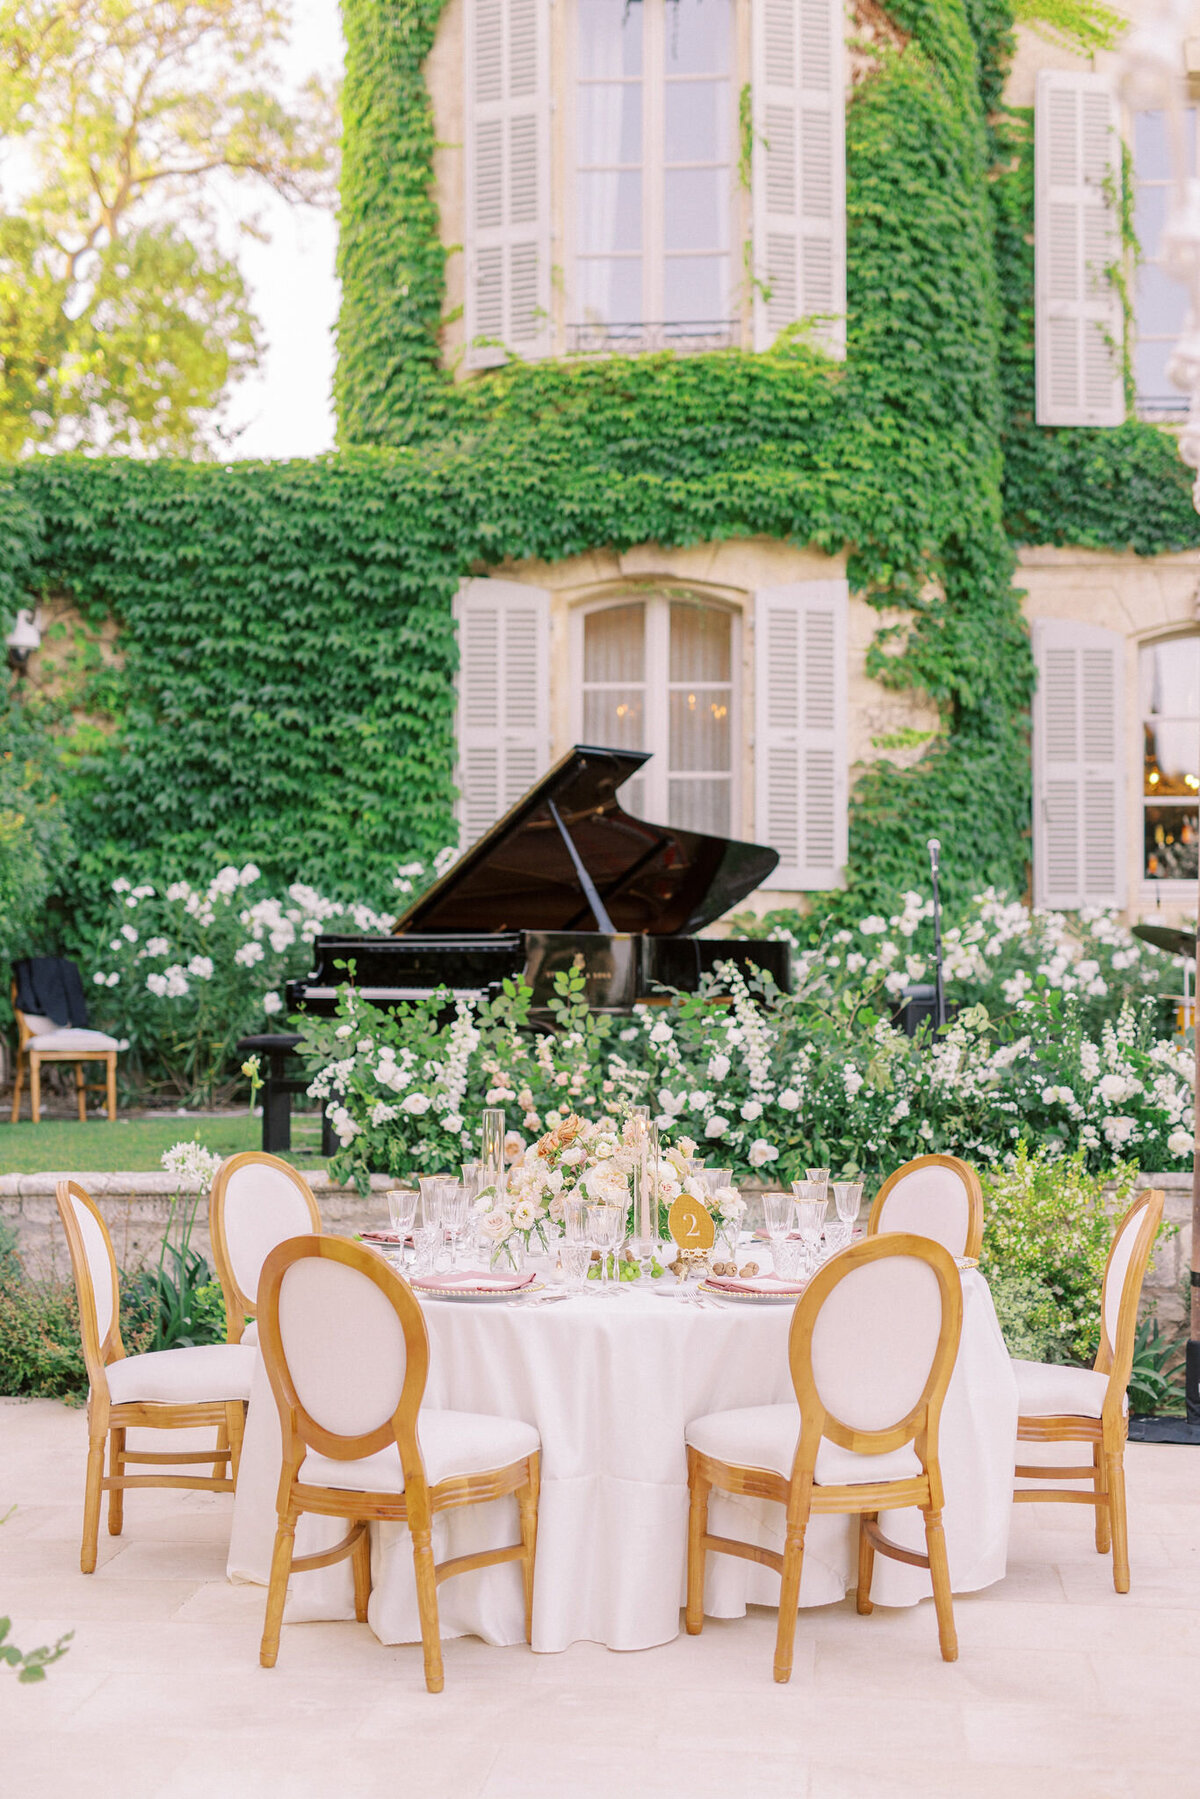 Jennifer Fox Weddings English speaking wedding planning & design agency in France crafting refined and bespoke weddings and celebrations Provence, Paris and destination MailysFortunePhotography_Jordan&Brian_654web